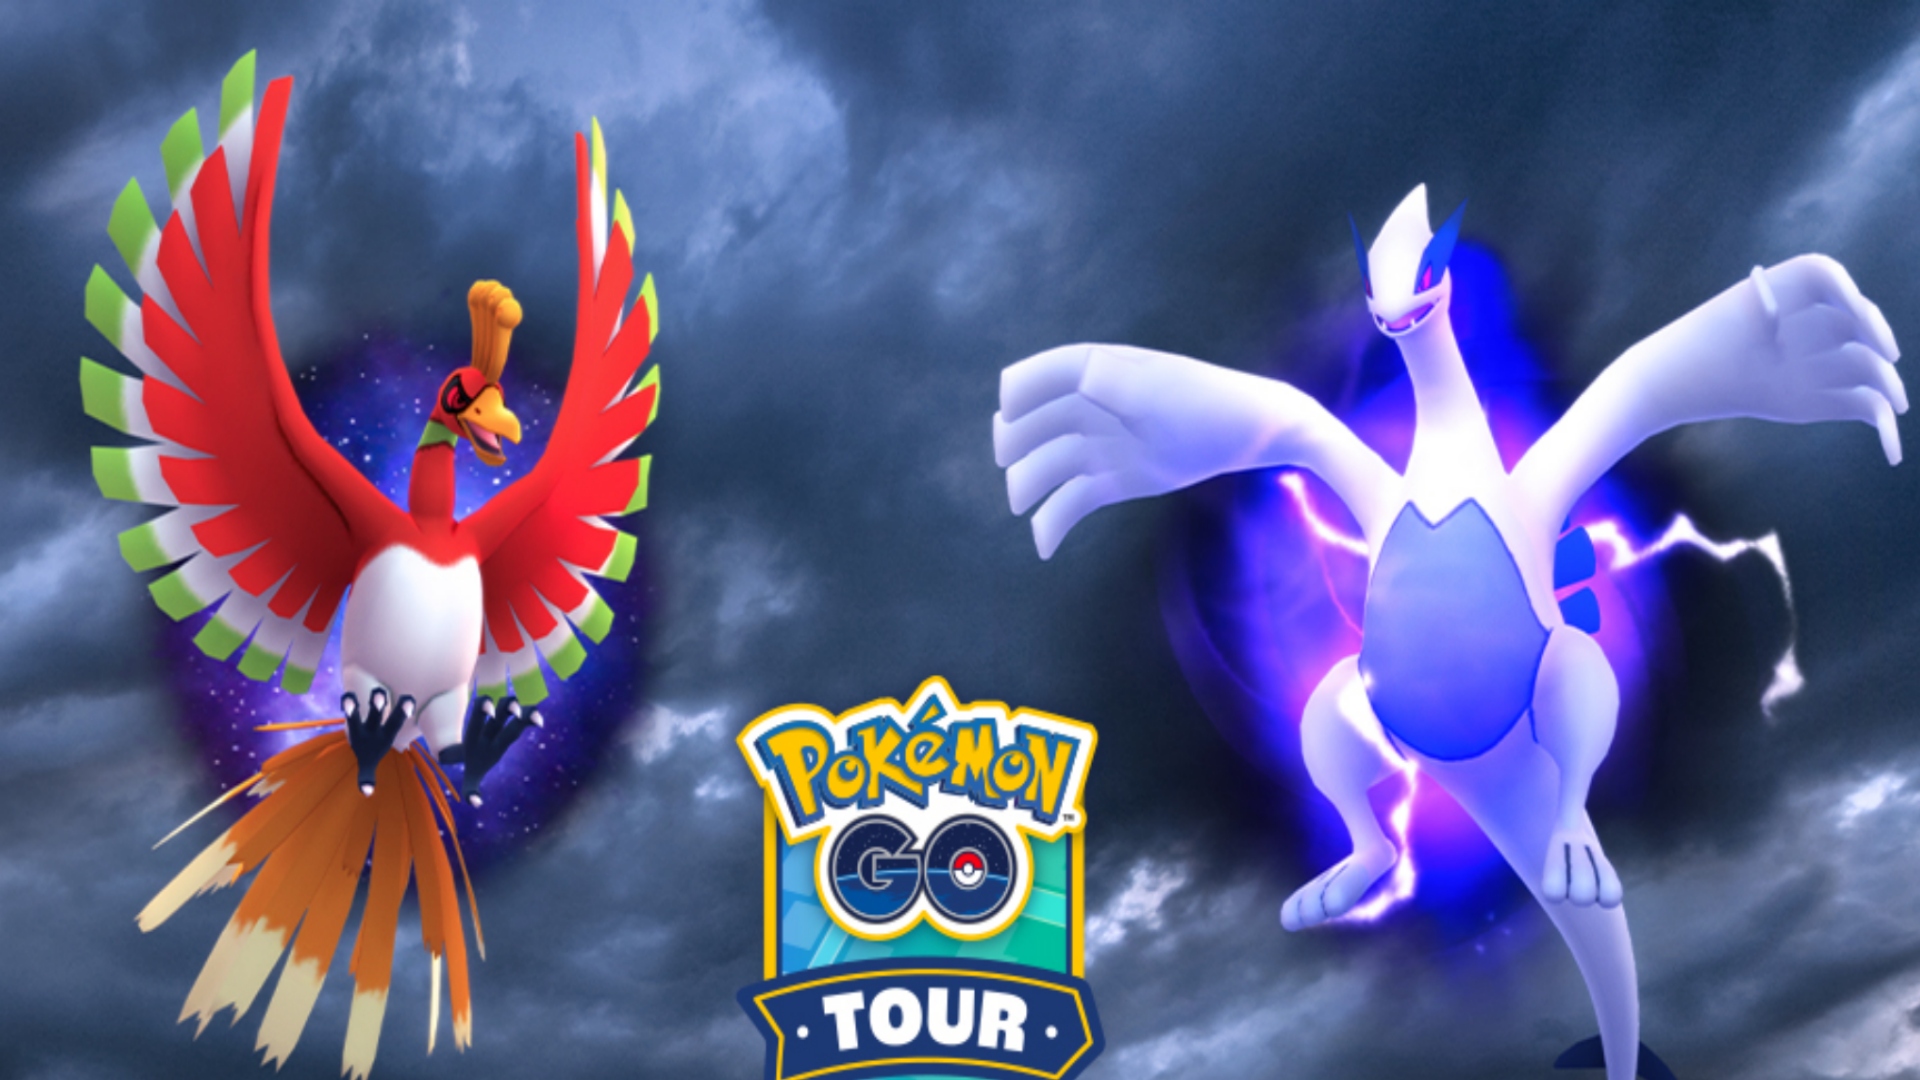 Shadow Raids Pokemon GO explained What are they?